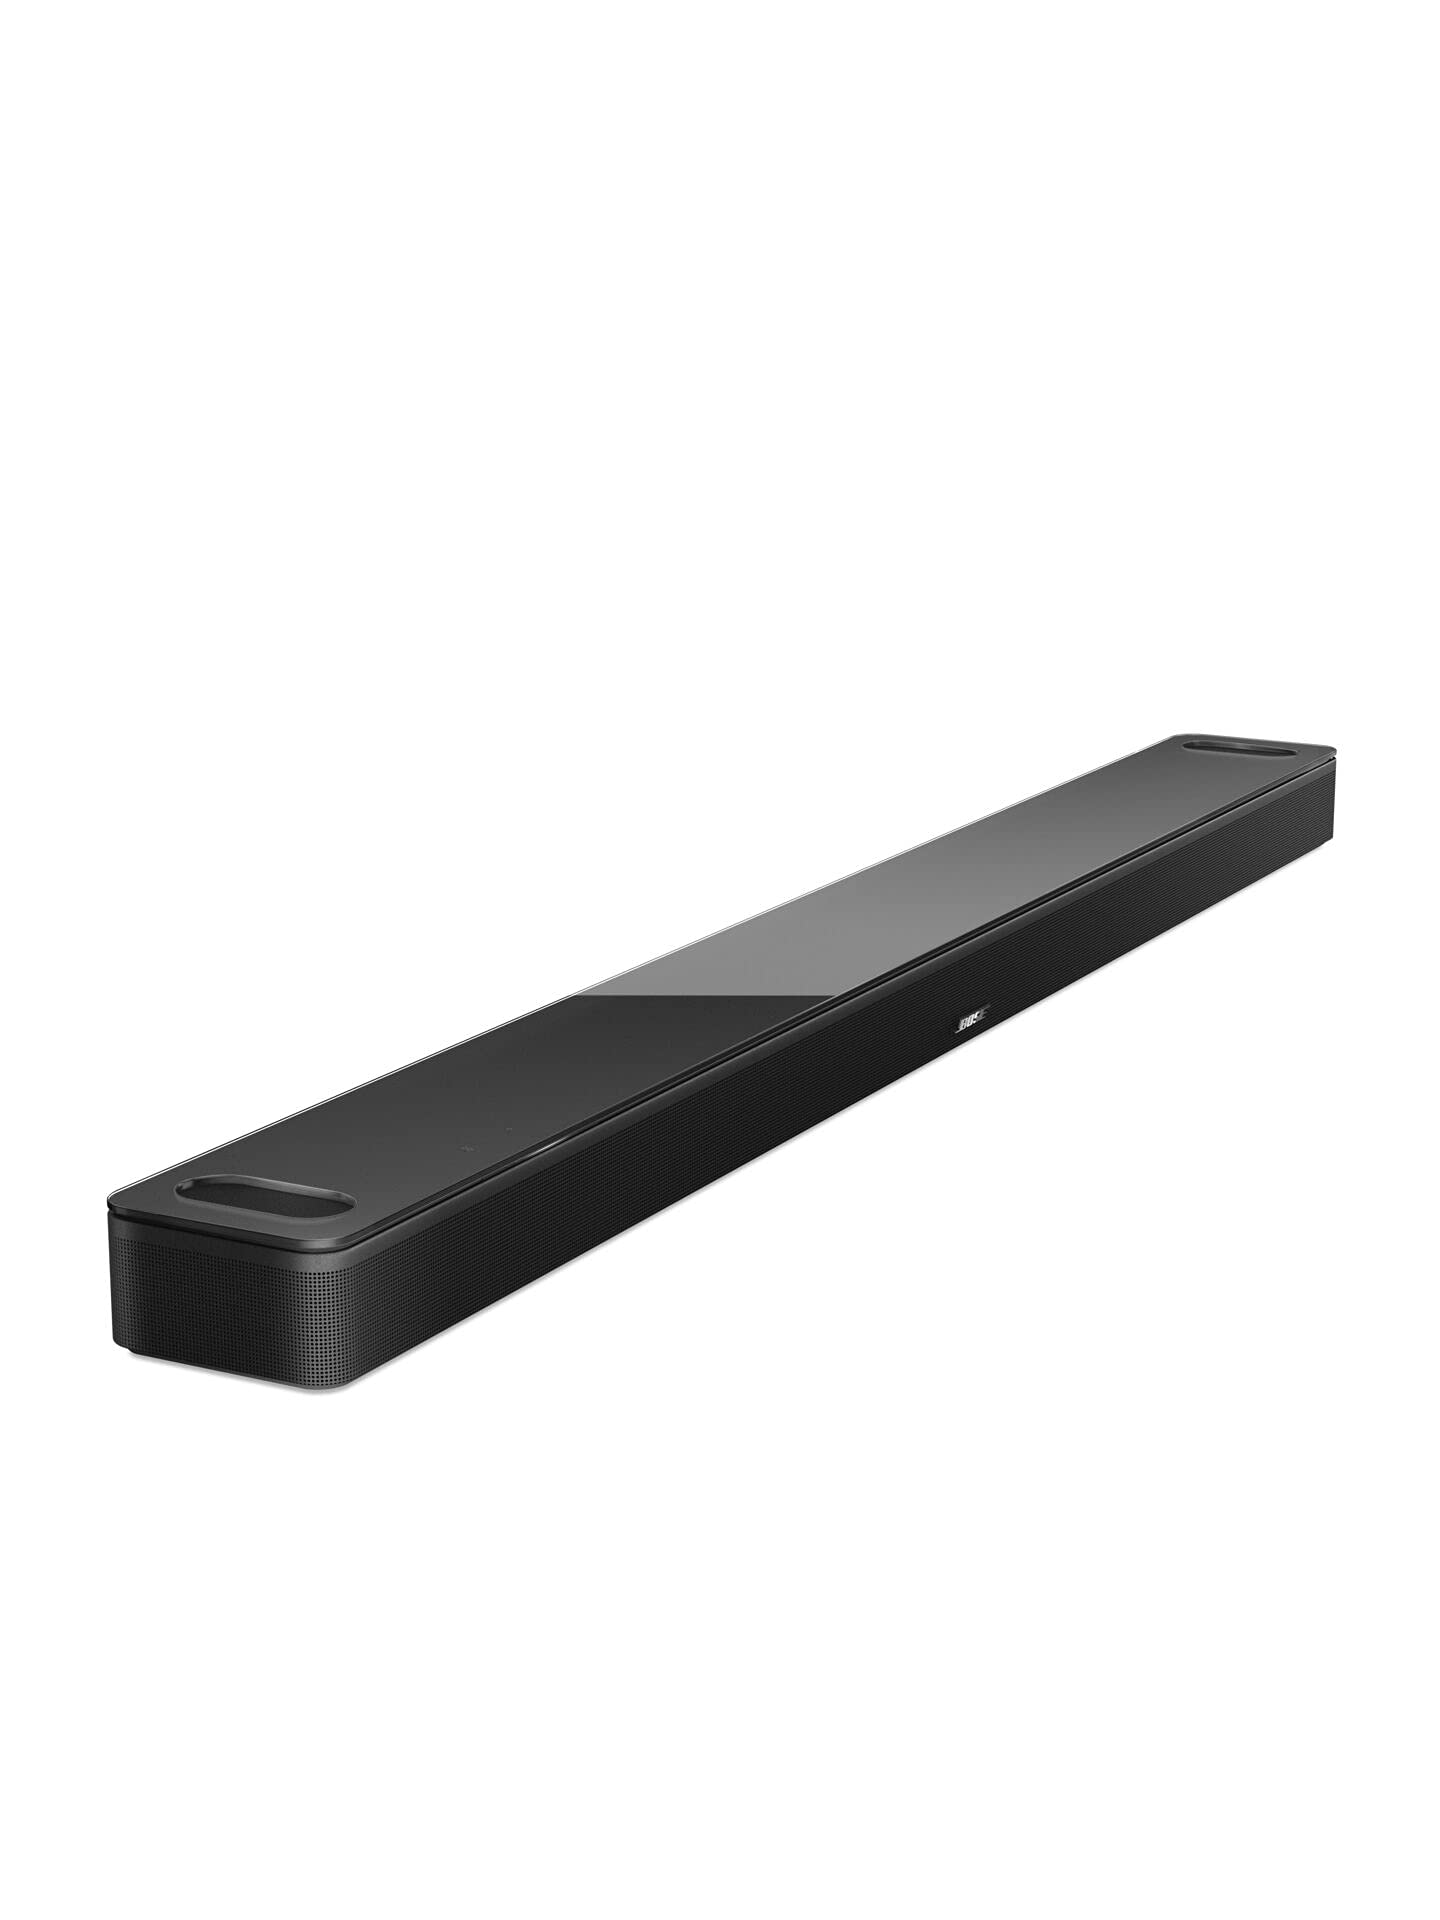 BOSE Smart Soundbar 900 Dolby Atmos with Alexa Built-In, Bluetooth connectivity